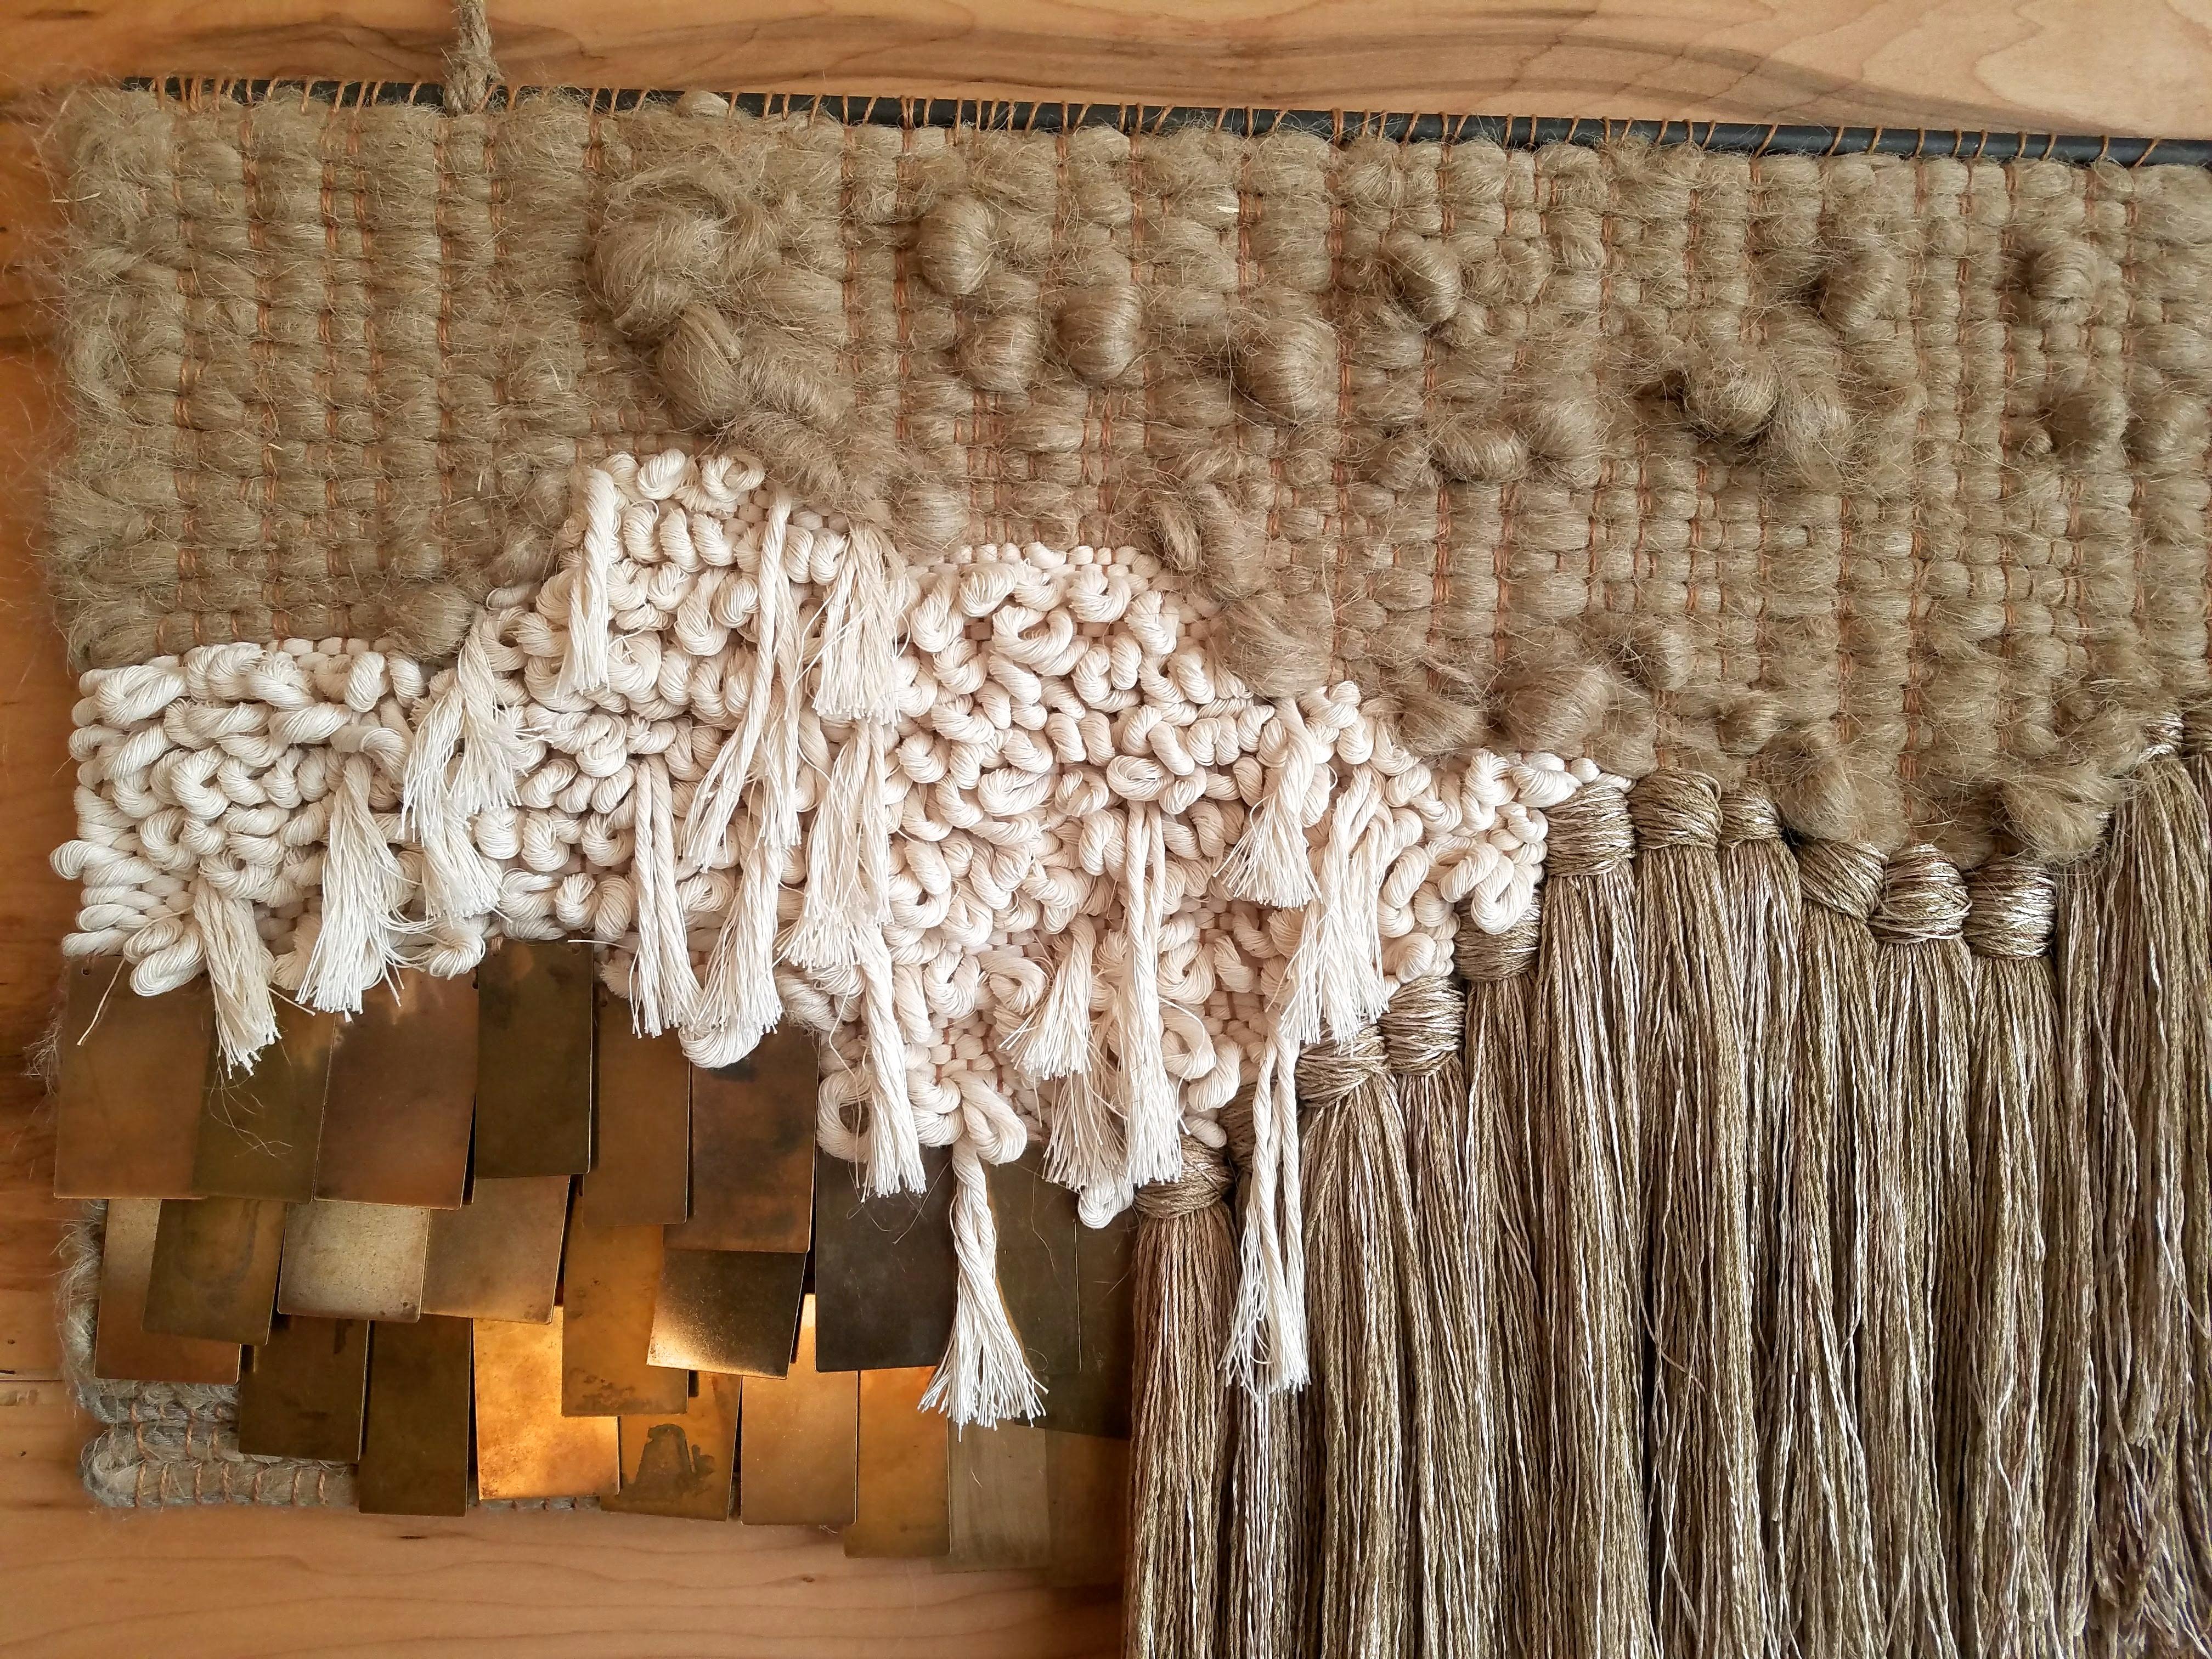 Handwoven, tapestry style, woven wall hanging by Janelle Pietrzak of All Roads. Inspired by the desert landscape. Rich use of texture and neutral colors like cream, hemp and beige creates depth in this piece. Fibers used are hemp, natural cotton